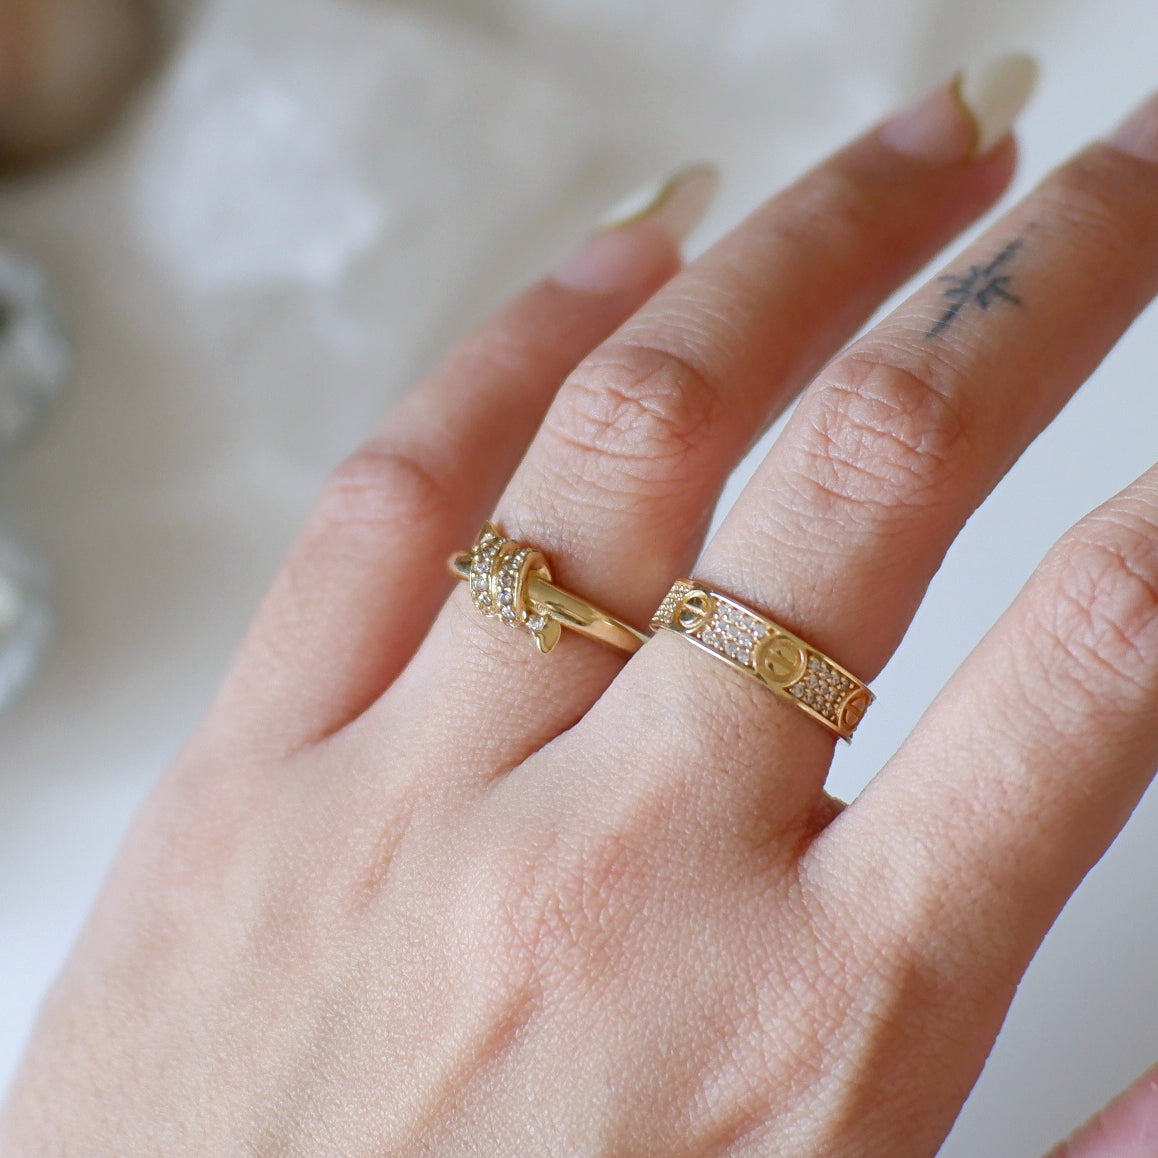 The Knot Chunky Ring in Solid Gold